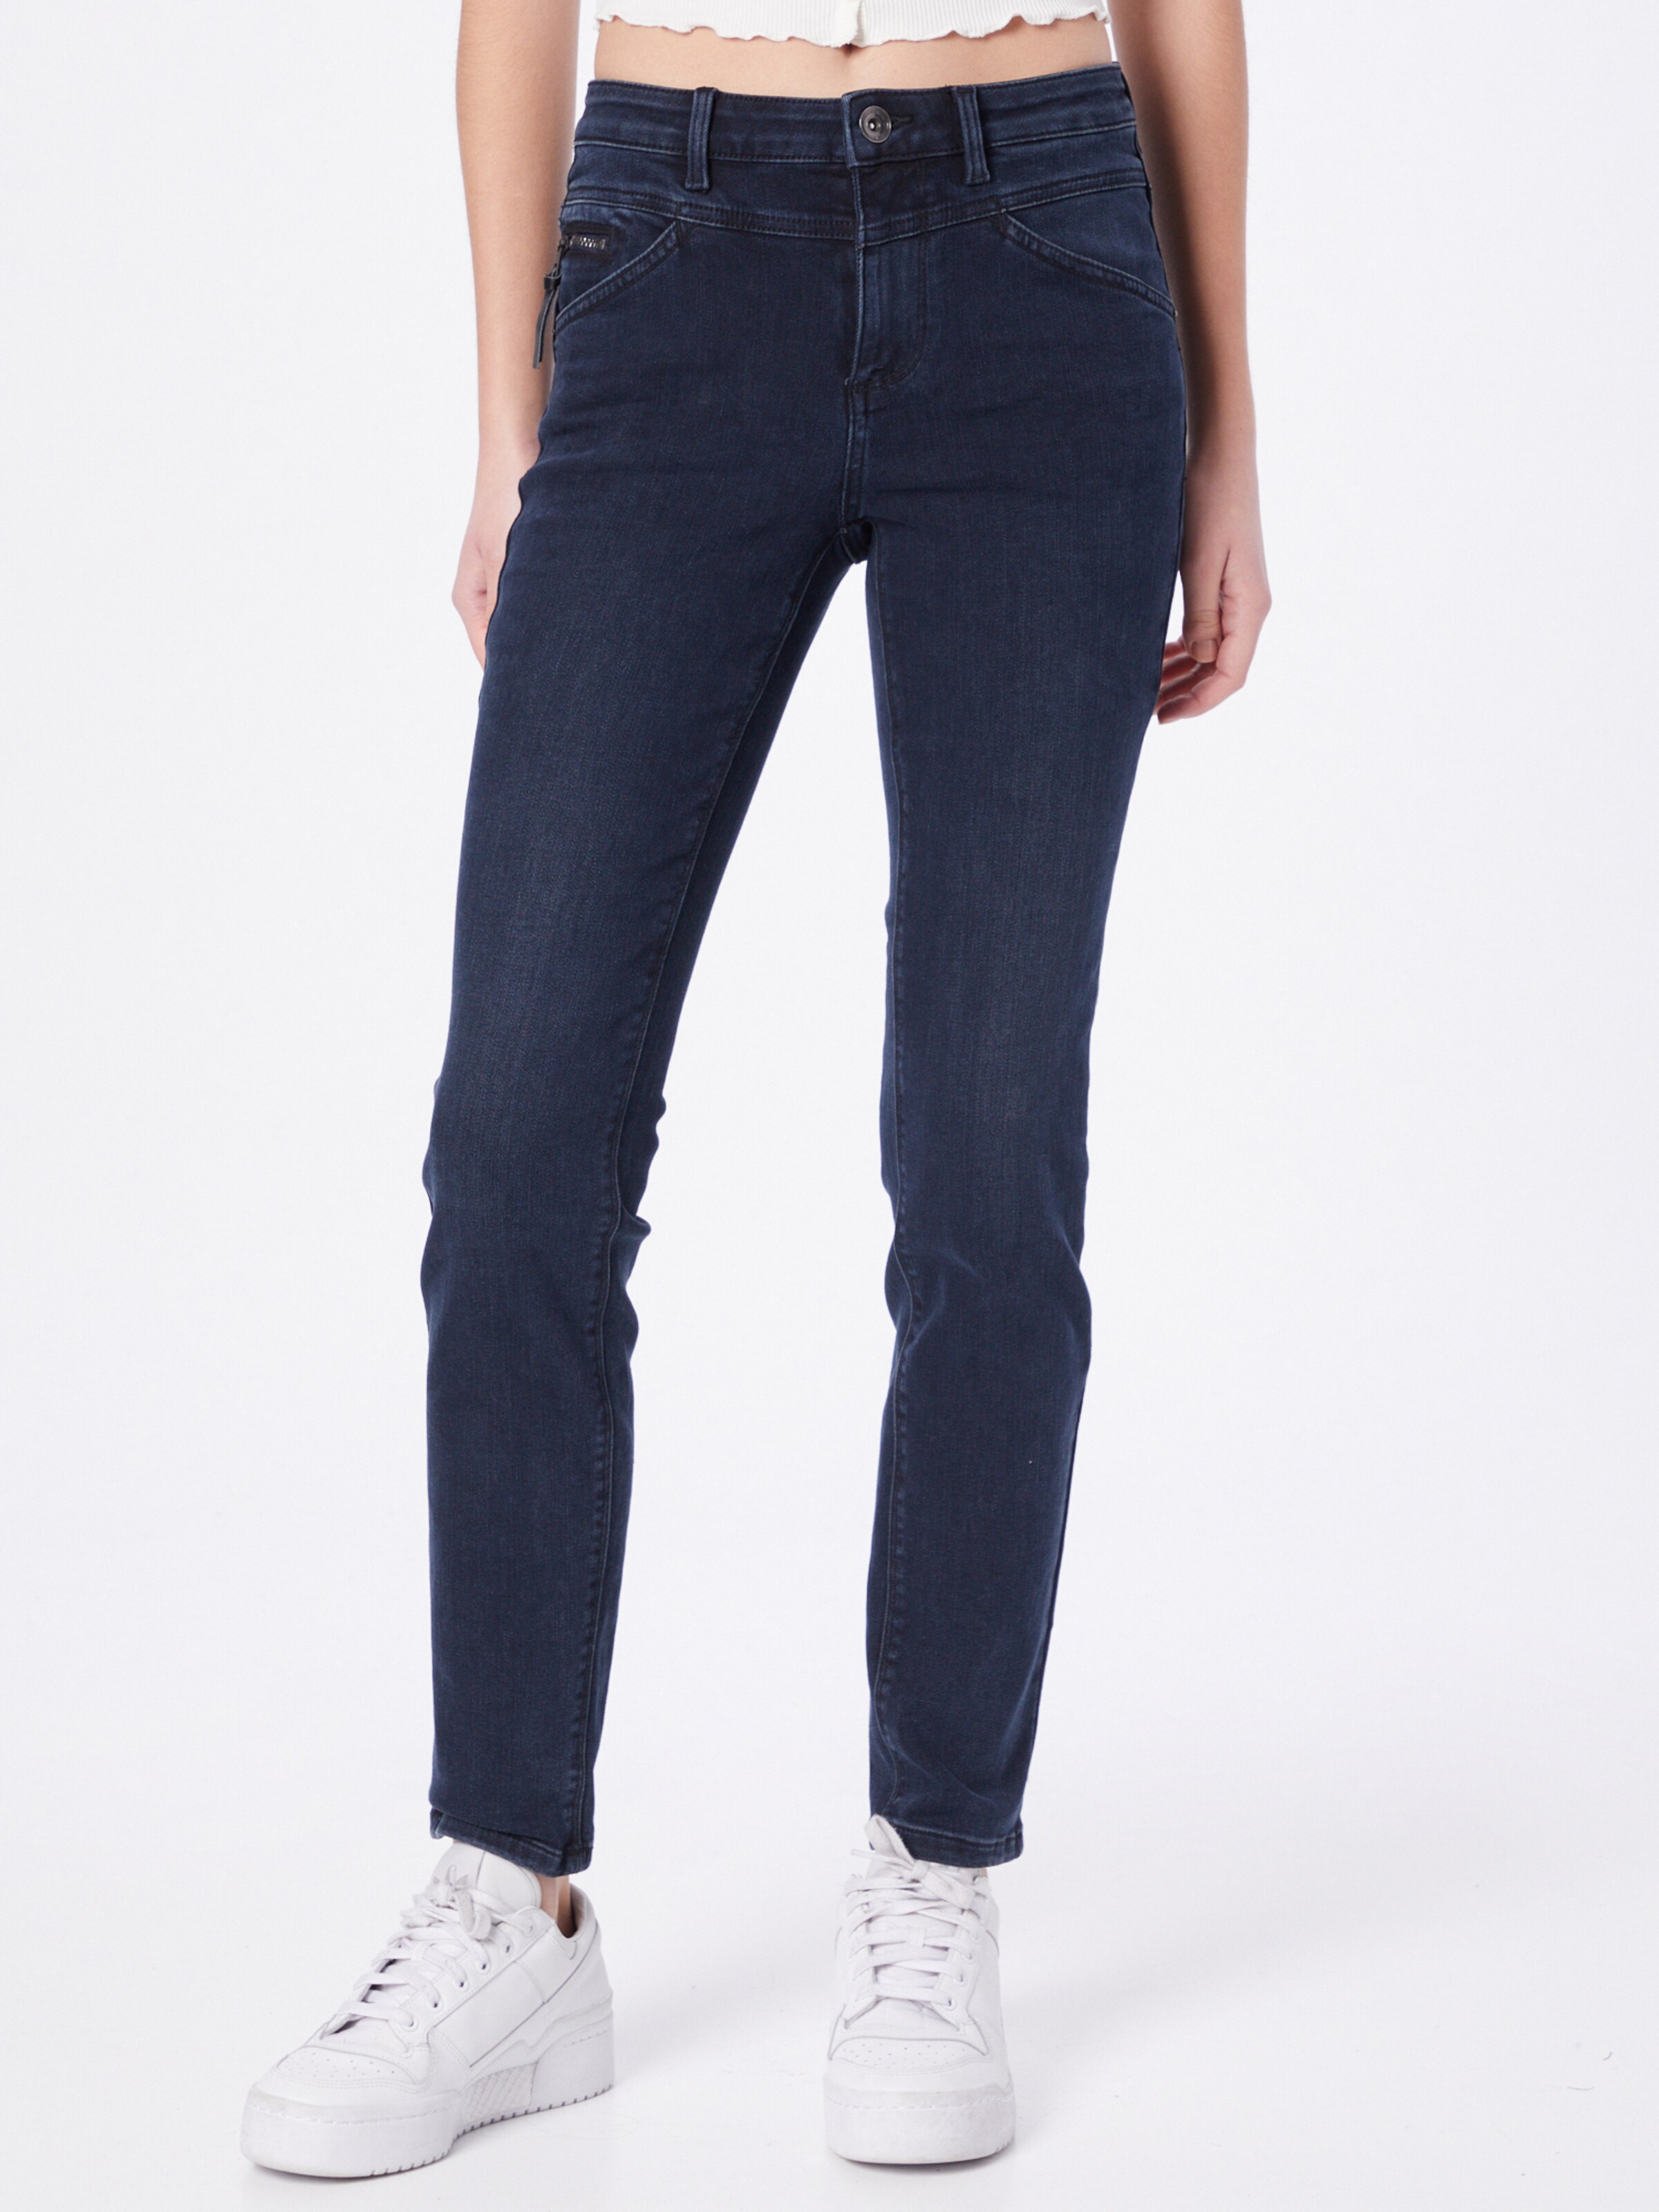 7nFGH Donna TOM TAILOR Jeans Alexa in Blu Scuro 